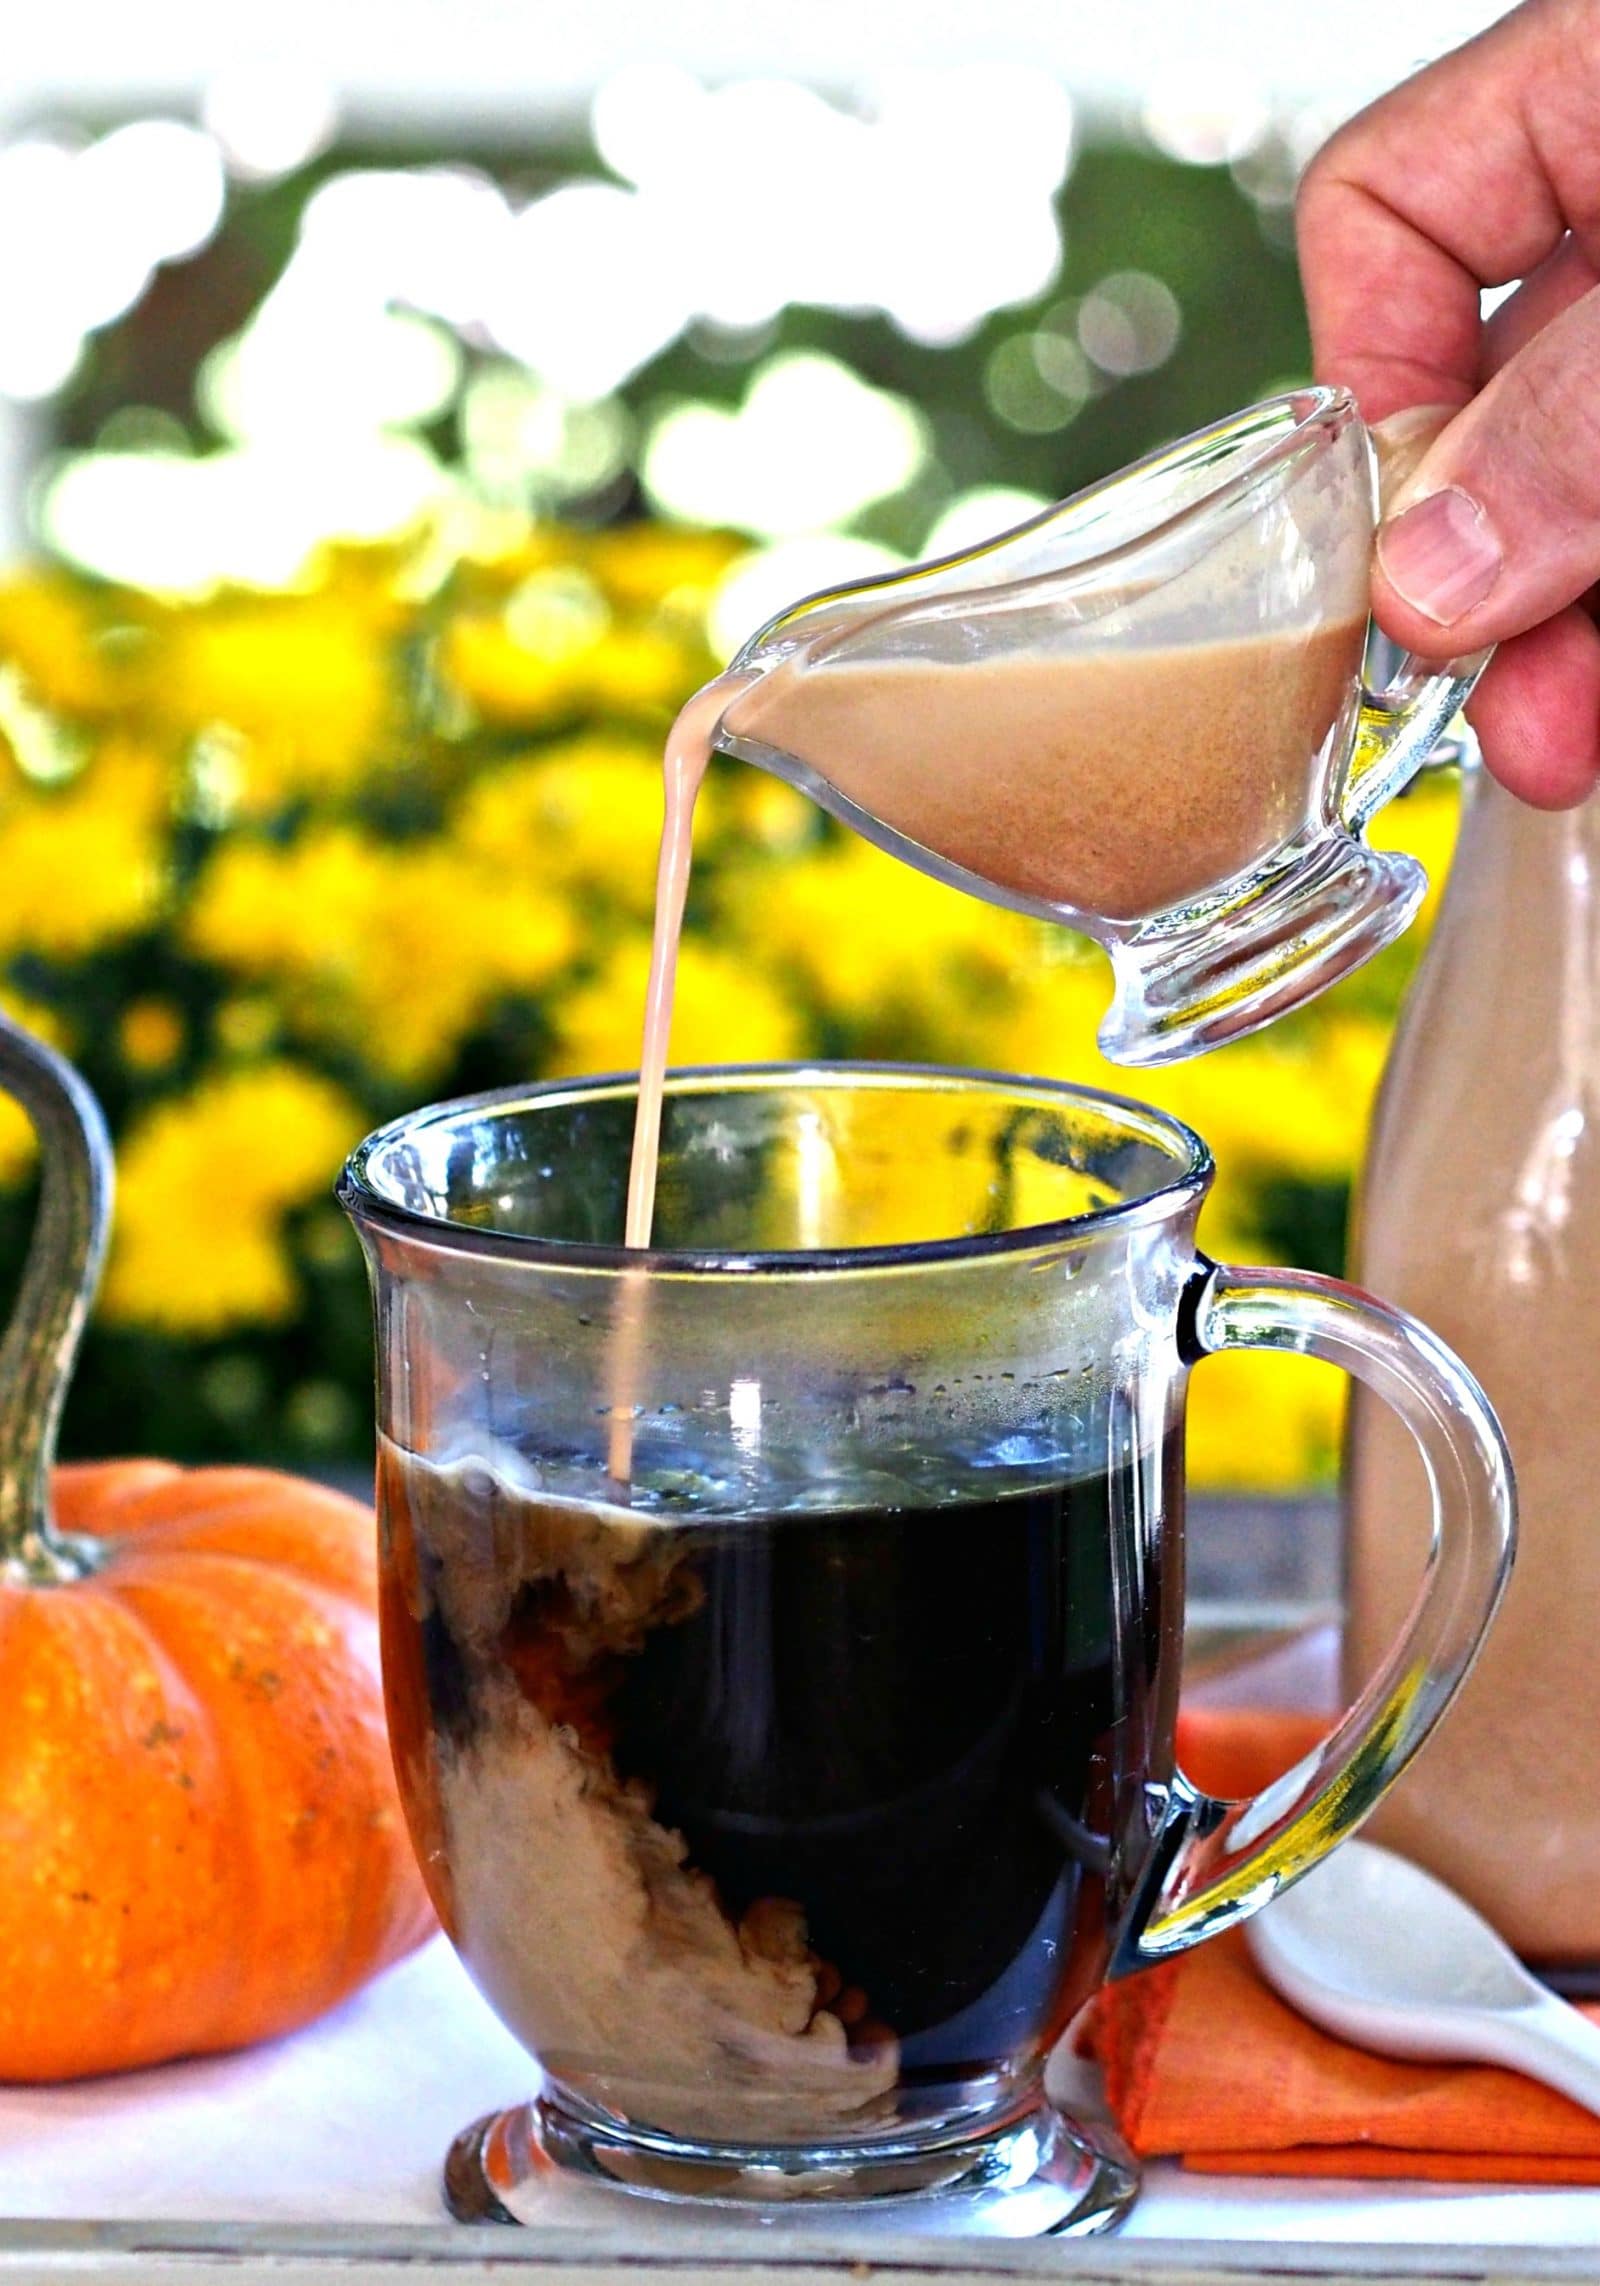 Homemade Coffee Creamer-less expensive, healthier & tastier than store-bought coffee creamer. Add favorite spices and flavorings to make your own creation. Simply Sated